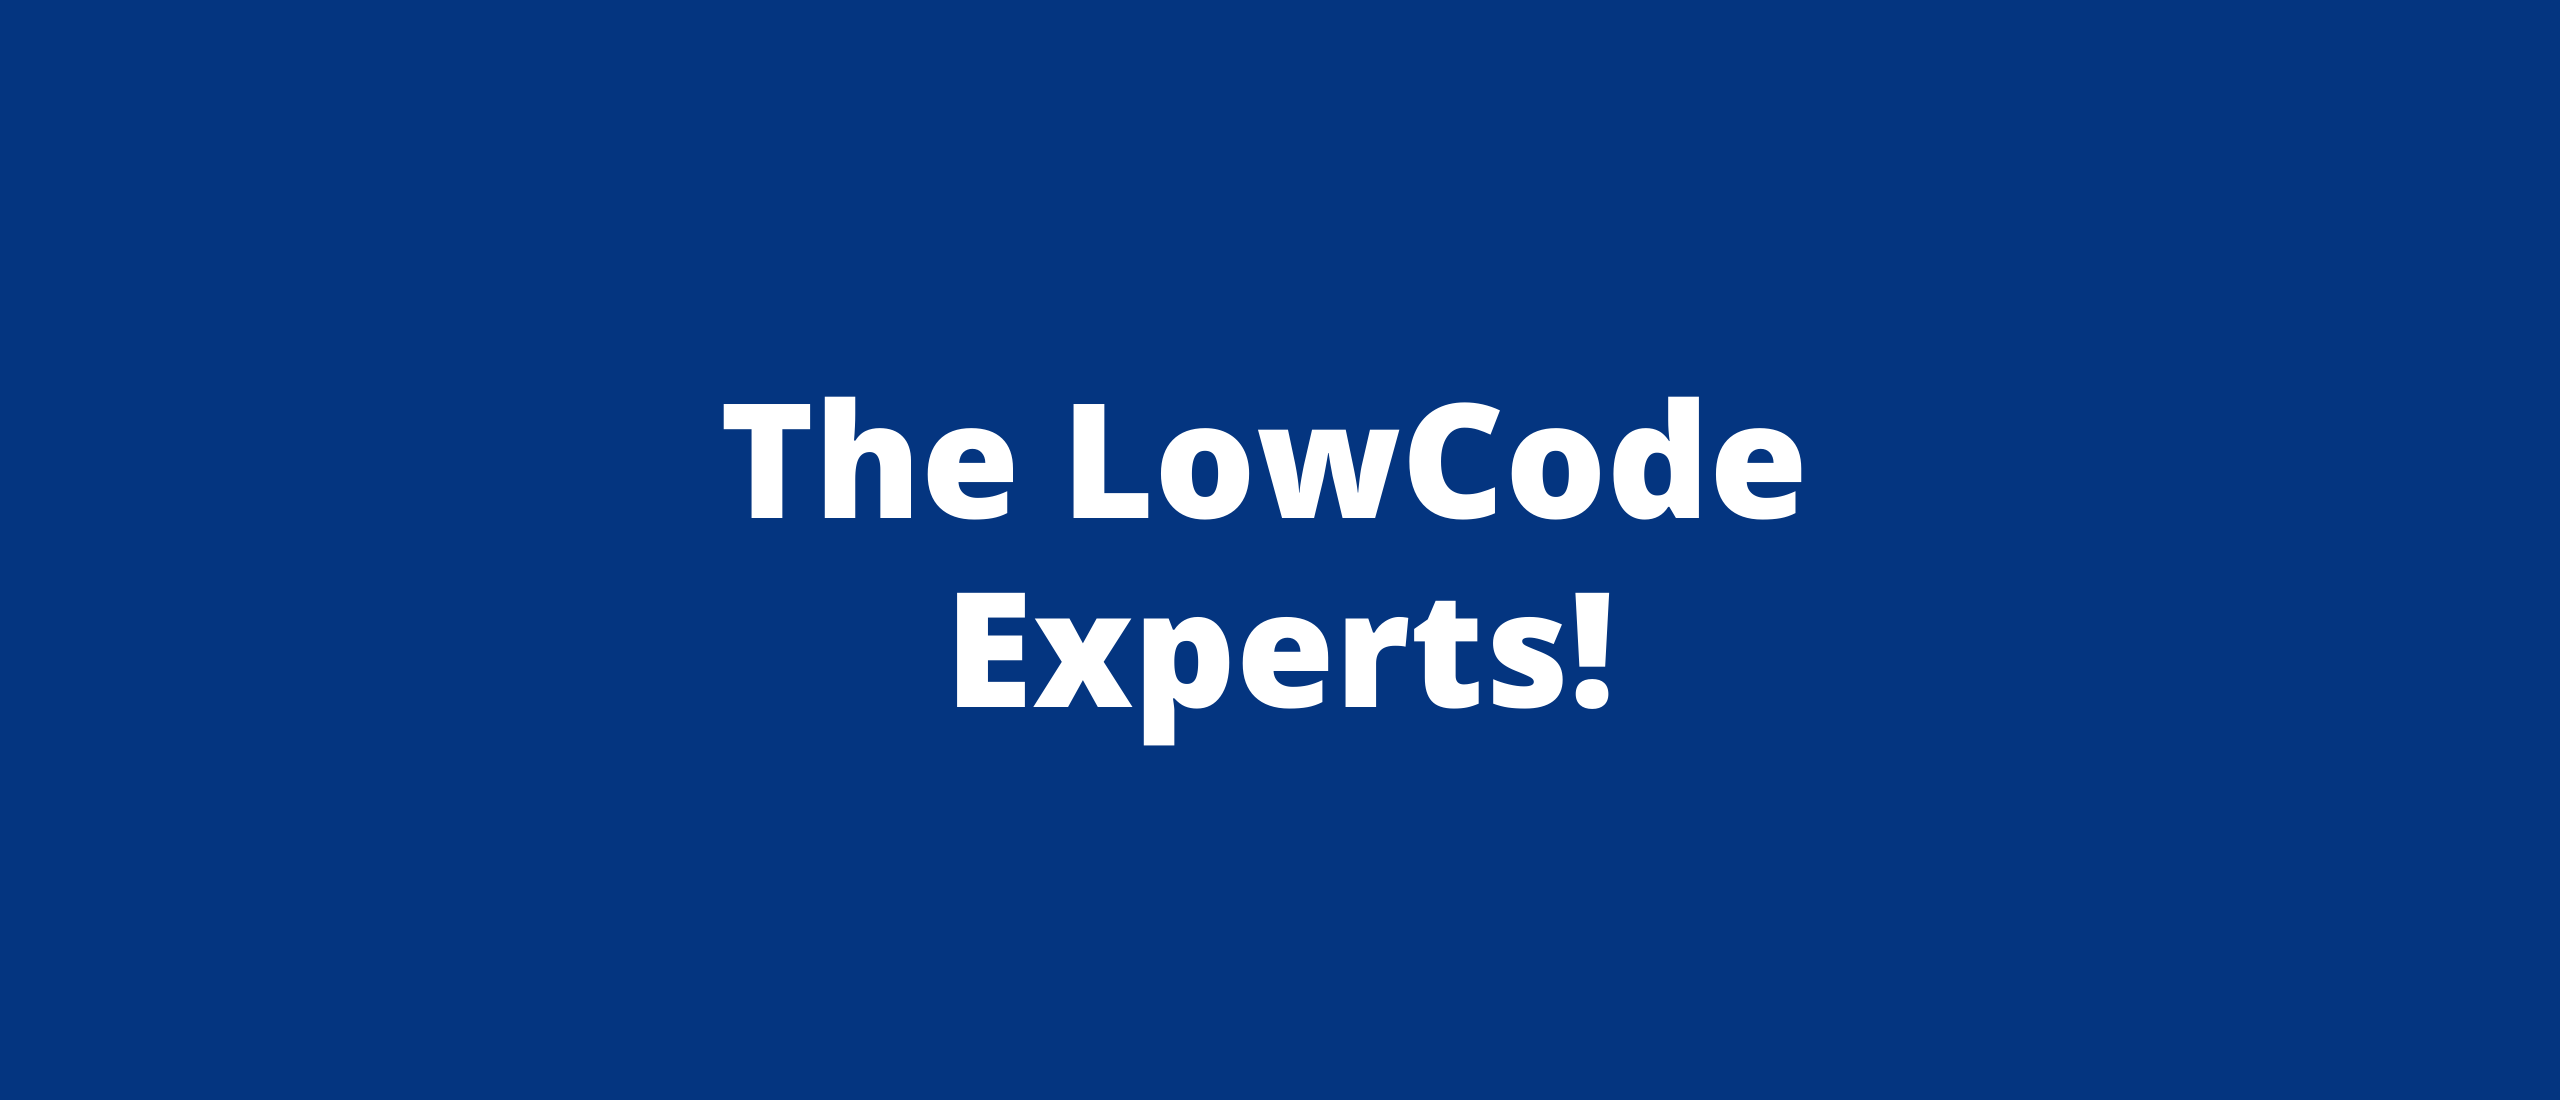 The LowCode Experts